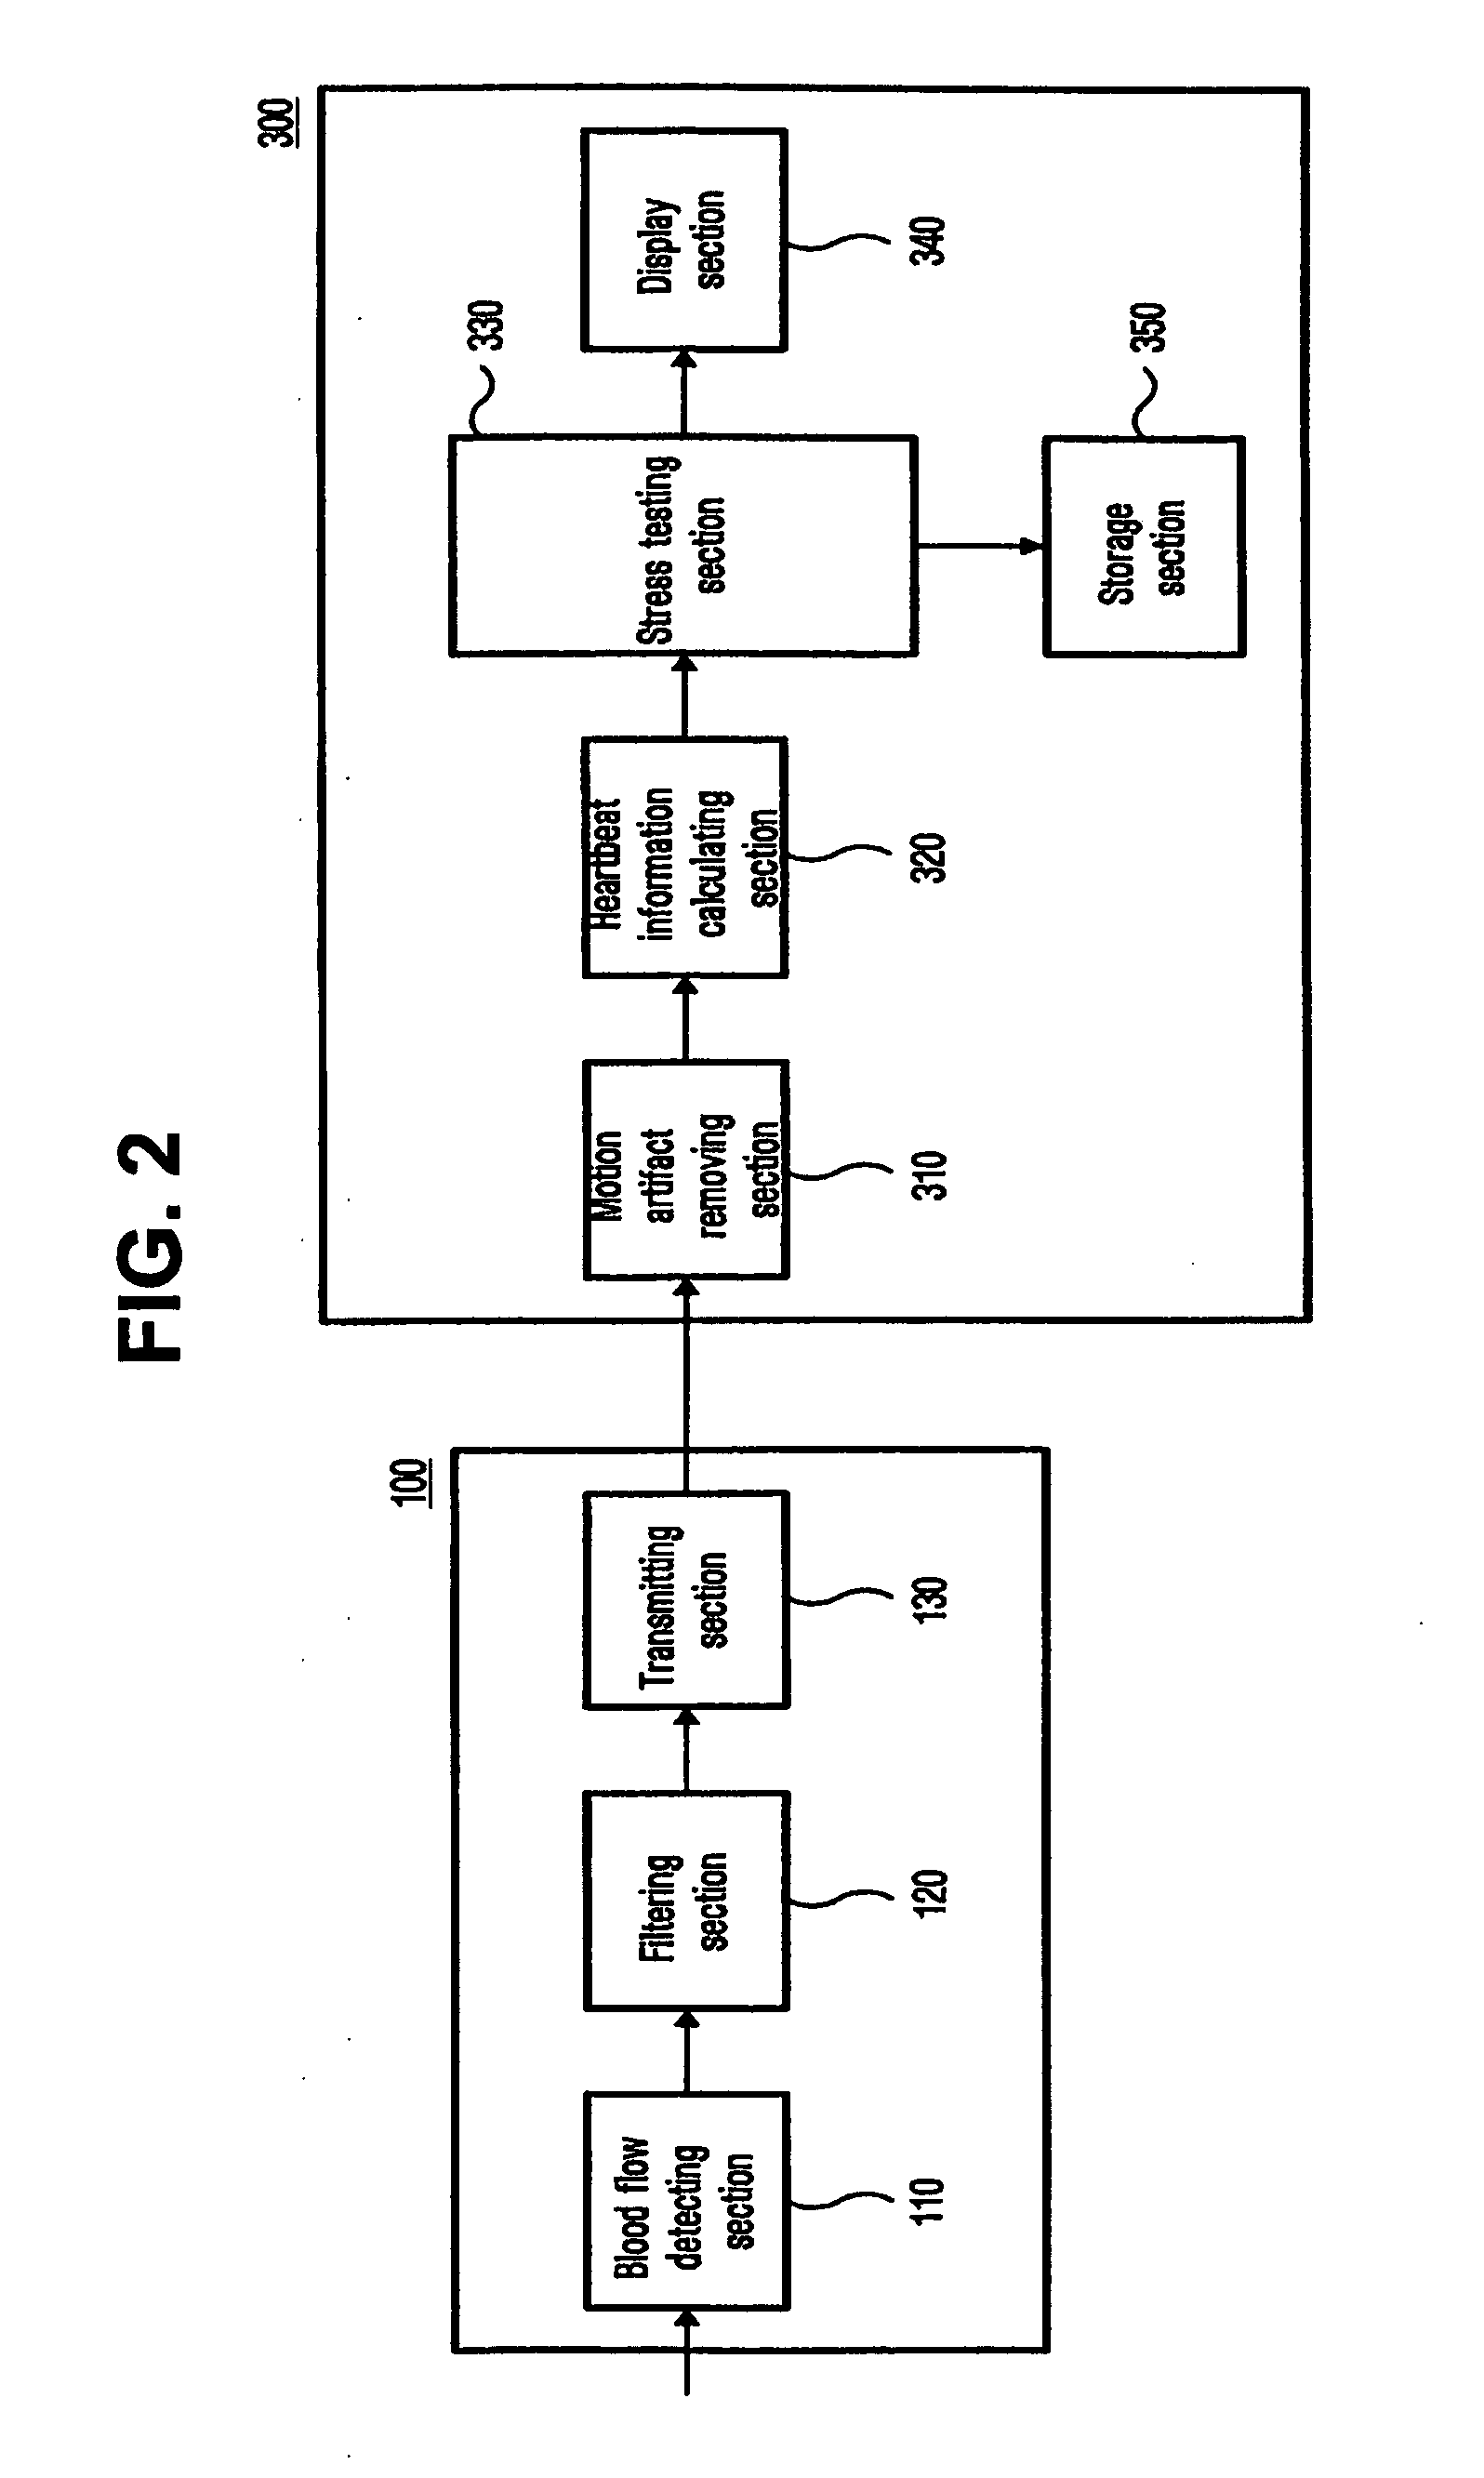 Apparatus and method for detecting blood flow signal free from motion artifact and stress test apparatus using the same